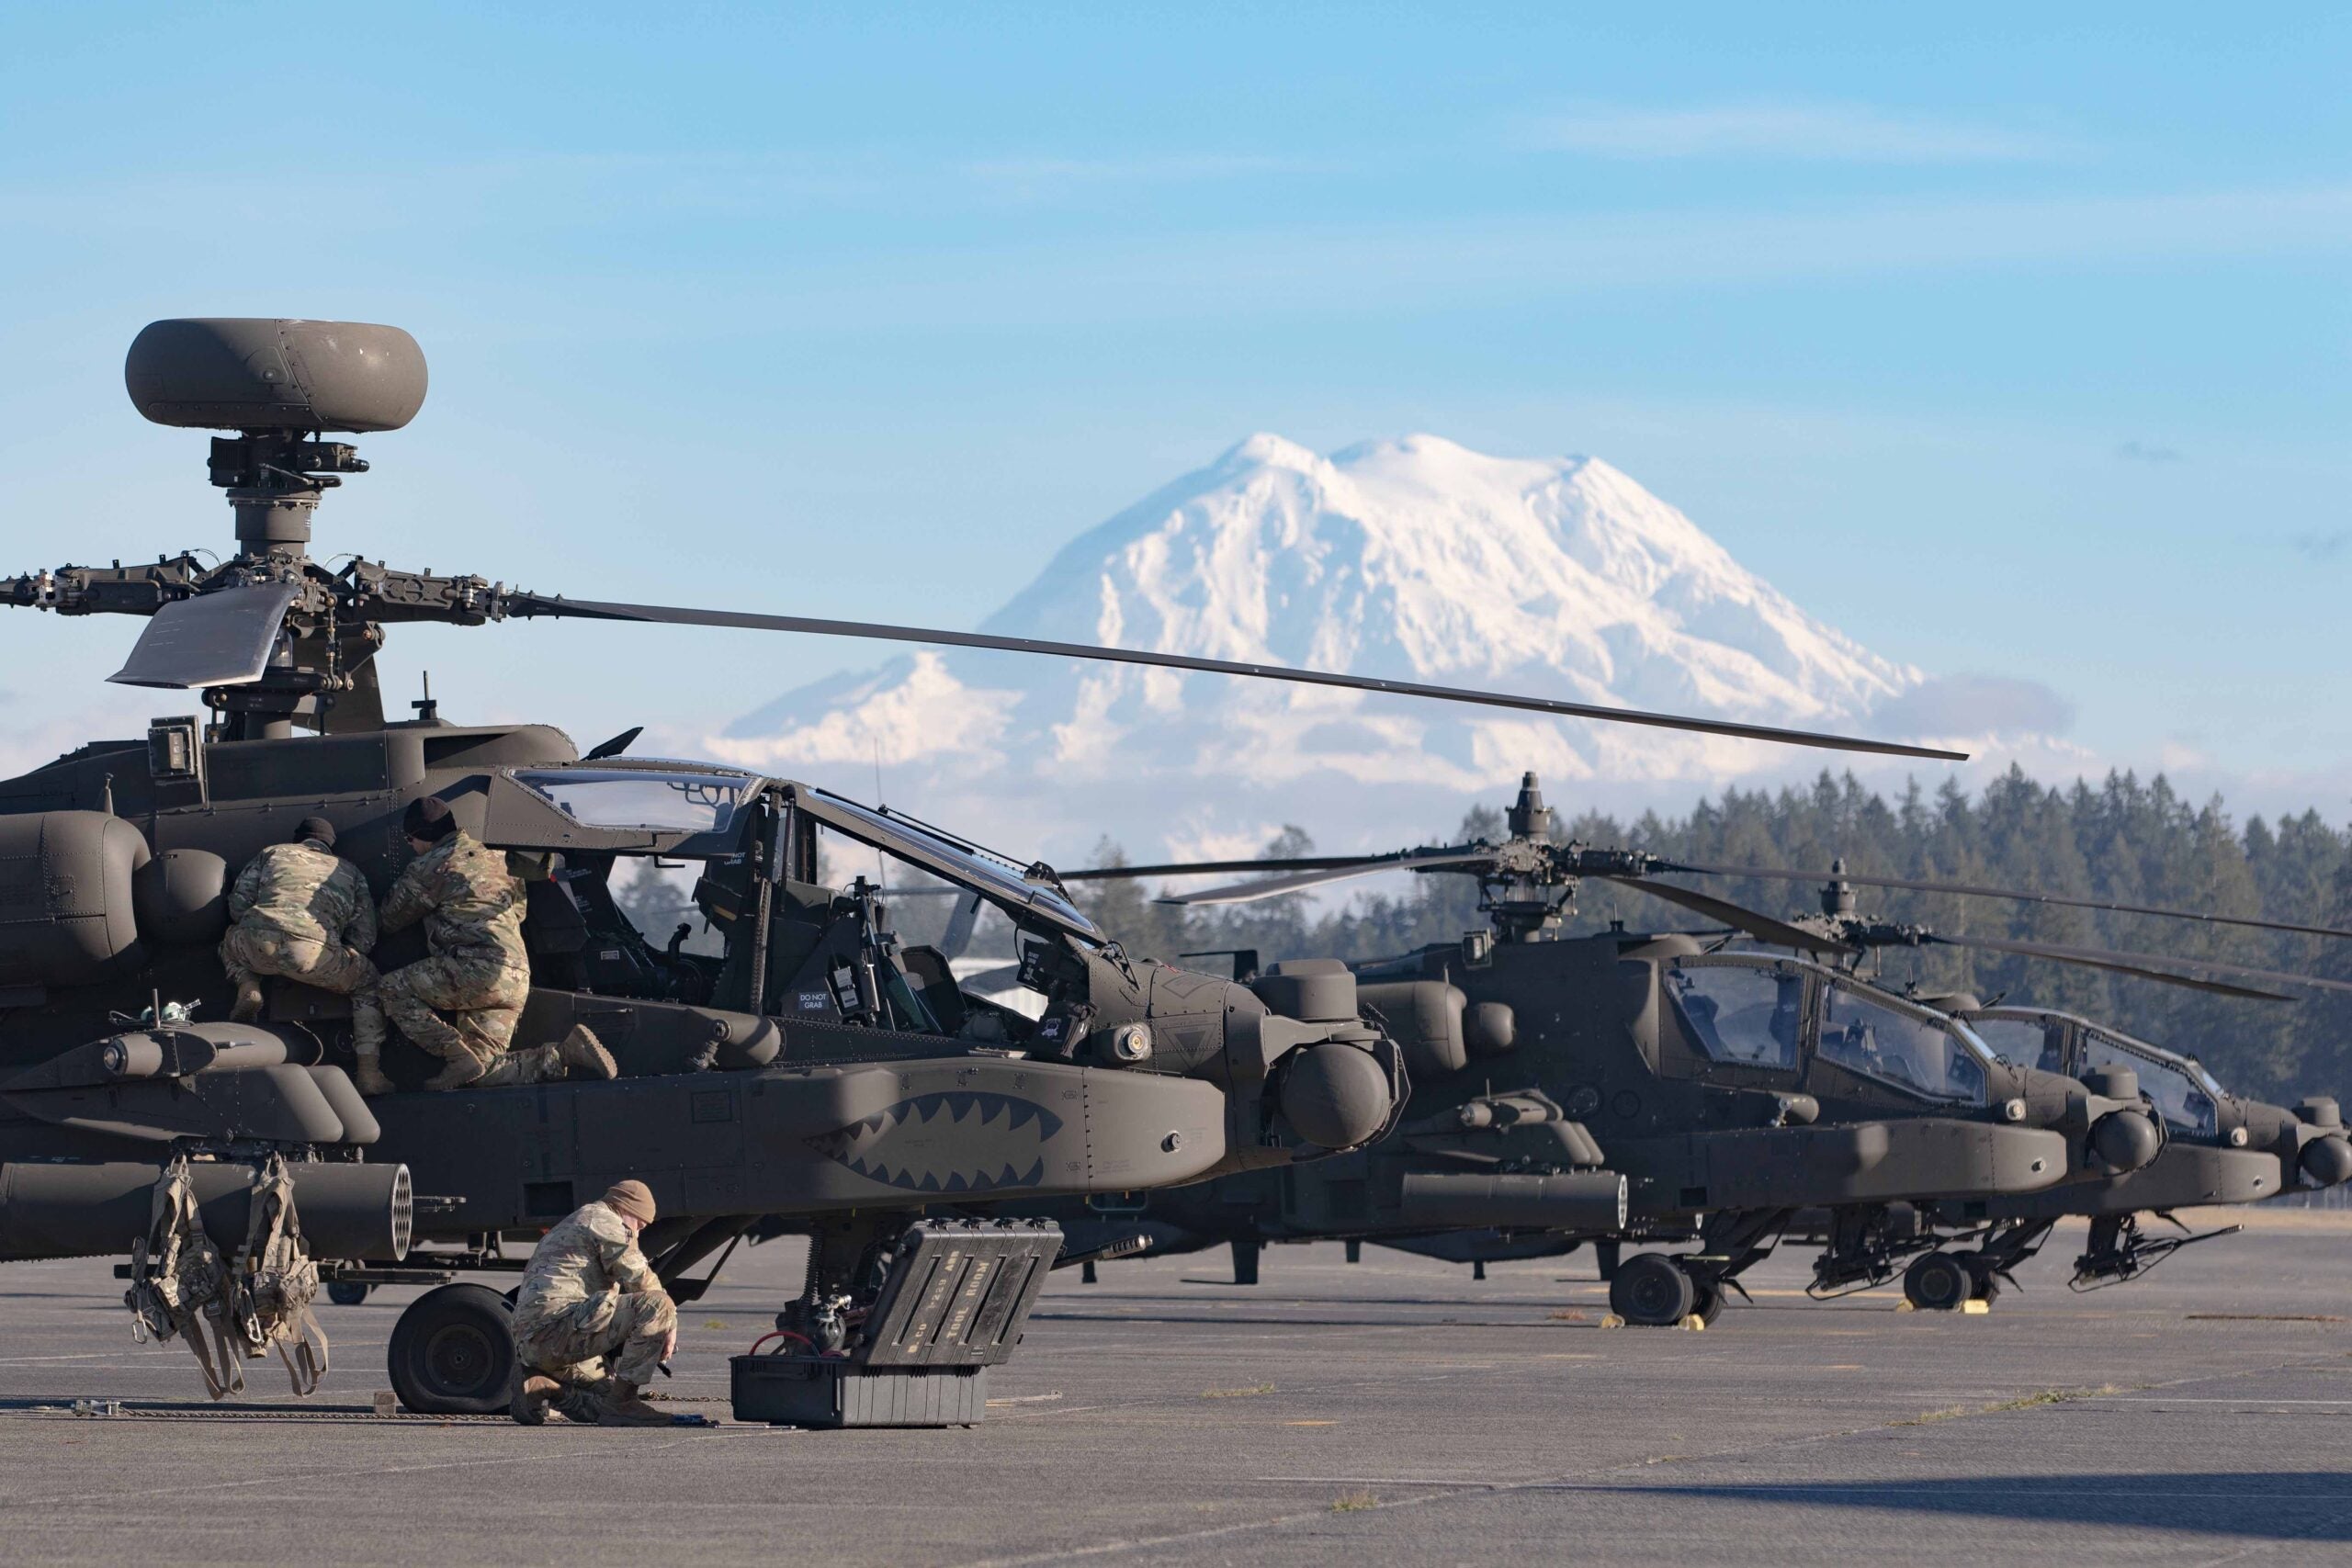 Soldiers assigned to 16th Combat Aviation Brigade perform maintenance on an AH-64E Apache attack helicopter at Joint Base Lewis-McChord, Wash. on Nov. 8, 2022. Mount Rainier is visible in the background. (U.S. Army photo by Capt. Kyle Abraham, 16th Combat Aviation Brigade)